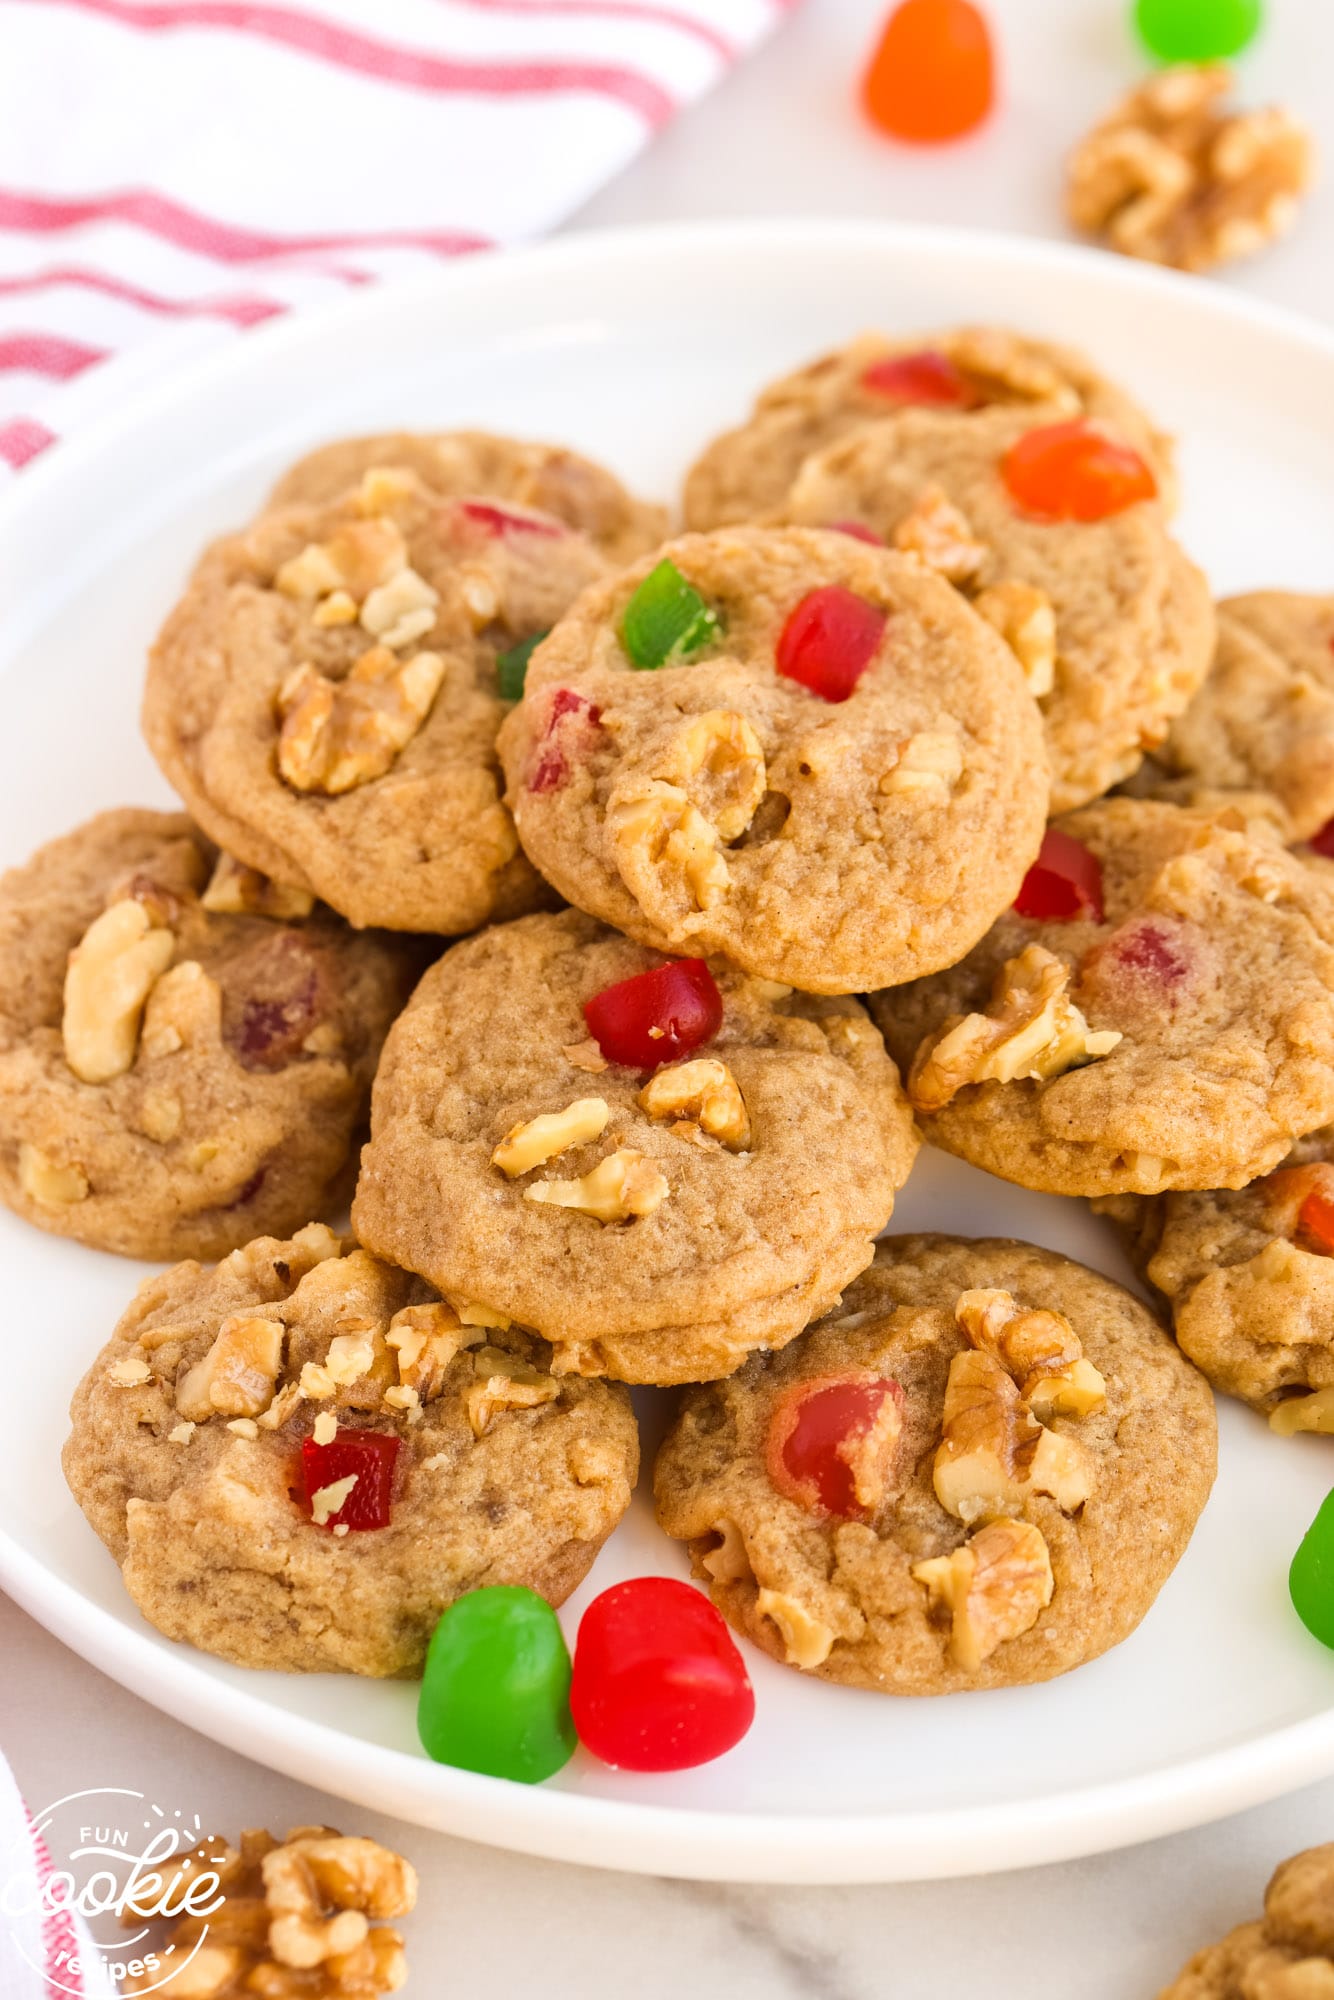 Gumdrop cookies with walnuts stacked on a white plate